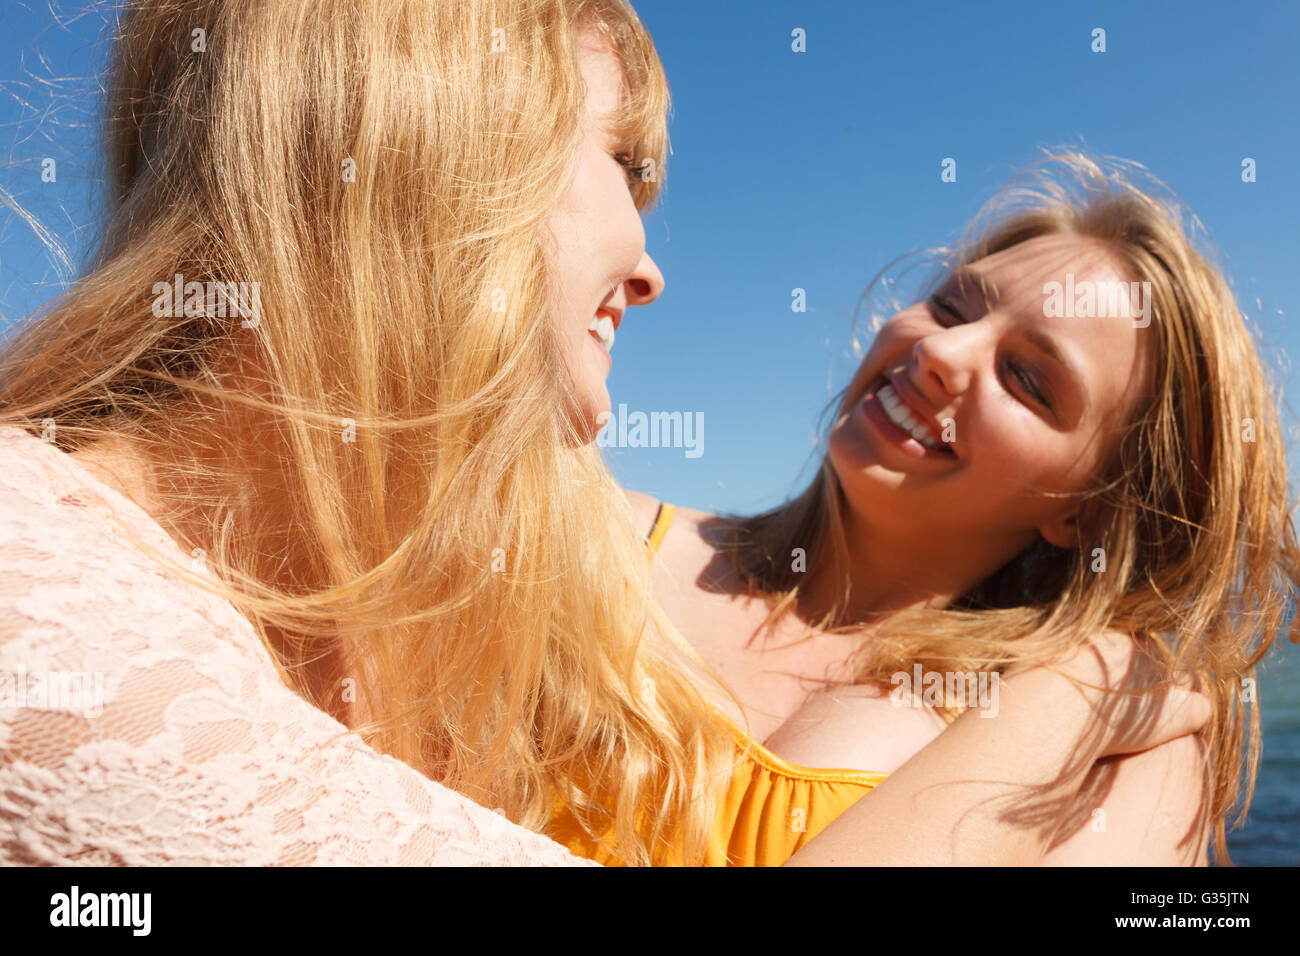 Two young women best friends blonde cheerful girls having fun outdoor against blue sky wind blowing in hair. Summer happiness friendship concept. Stock Photo